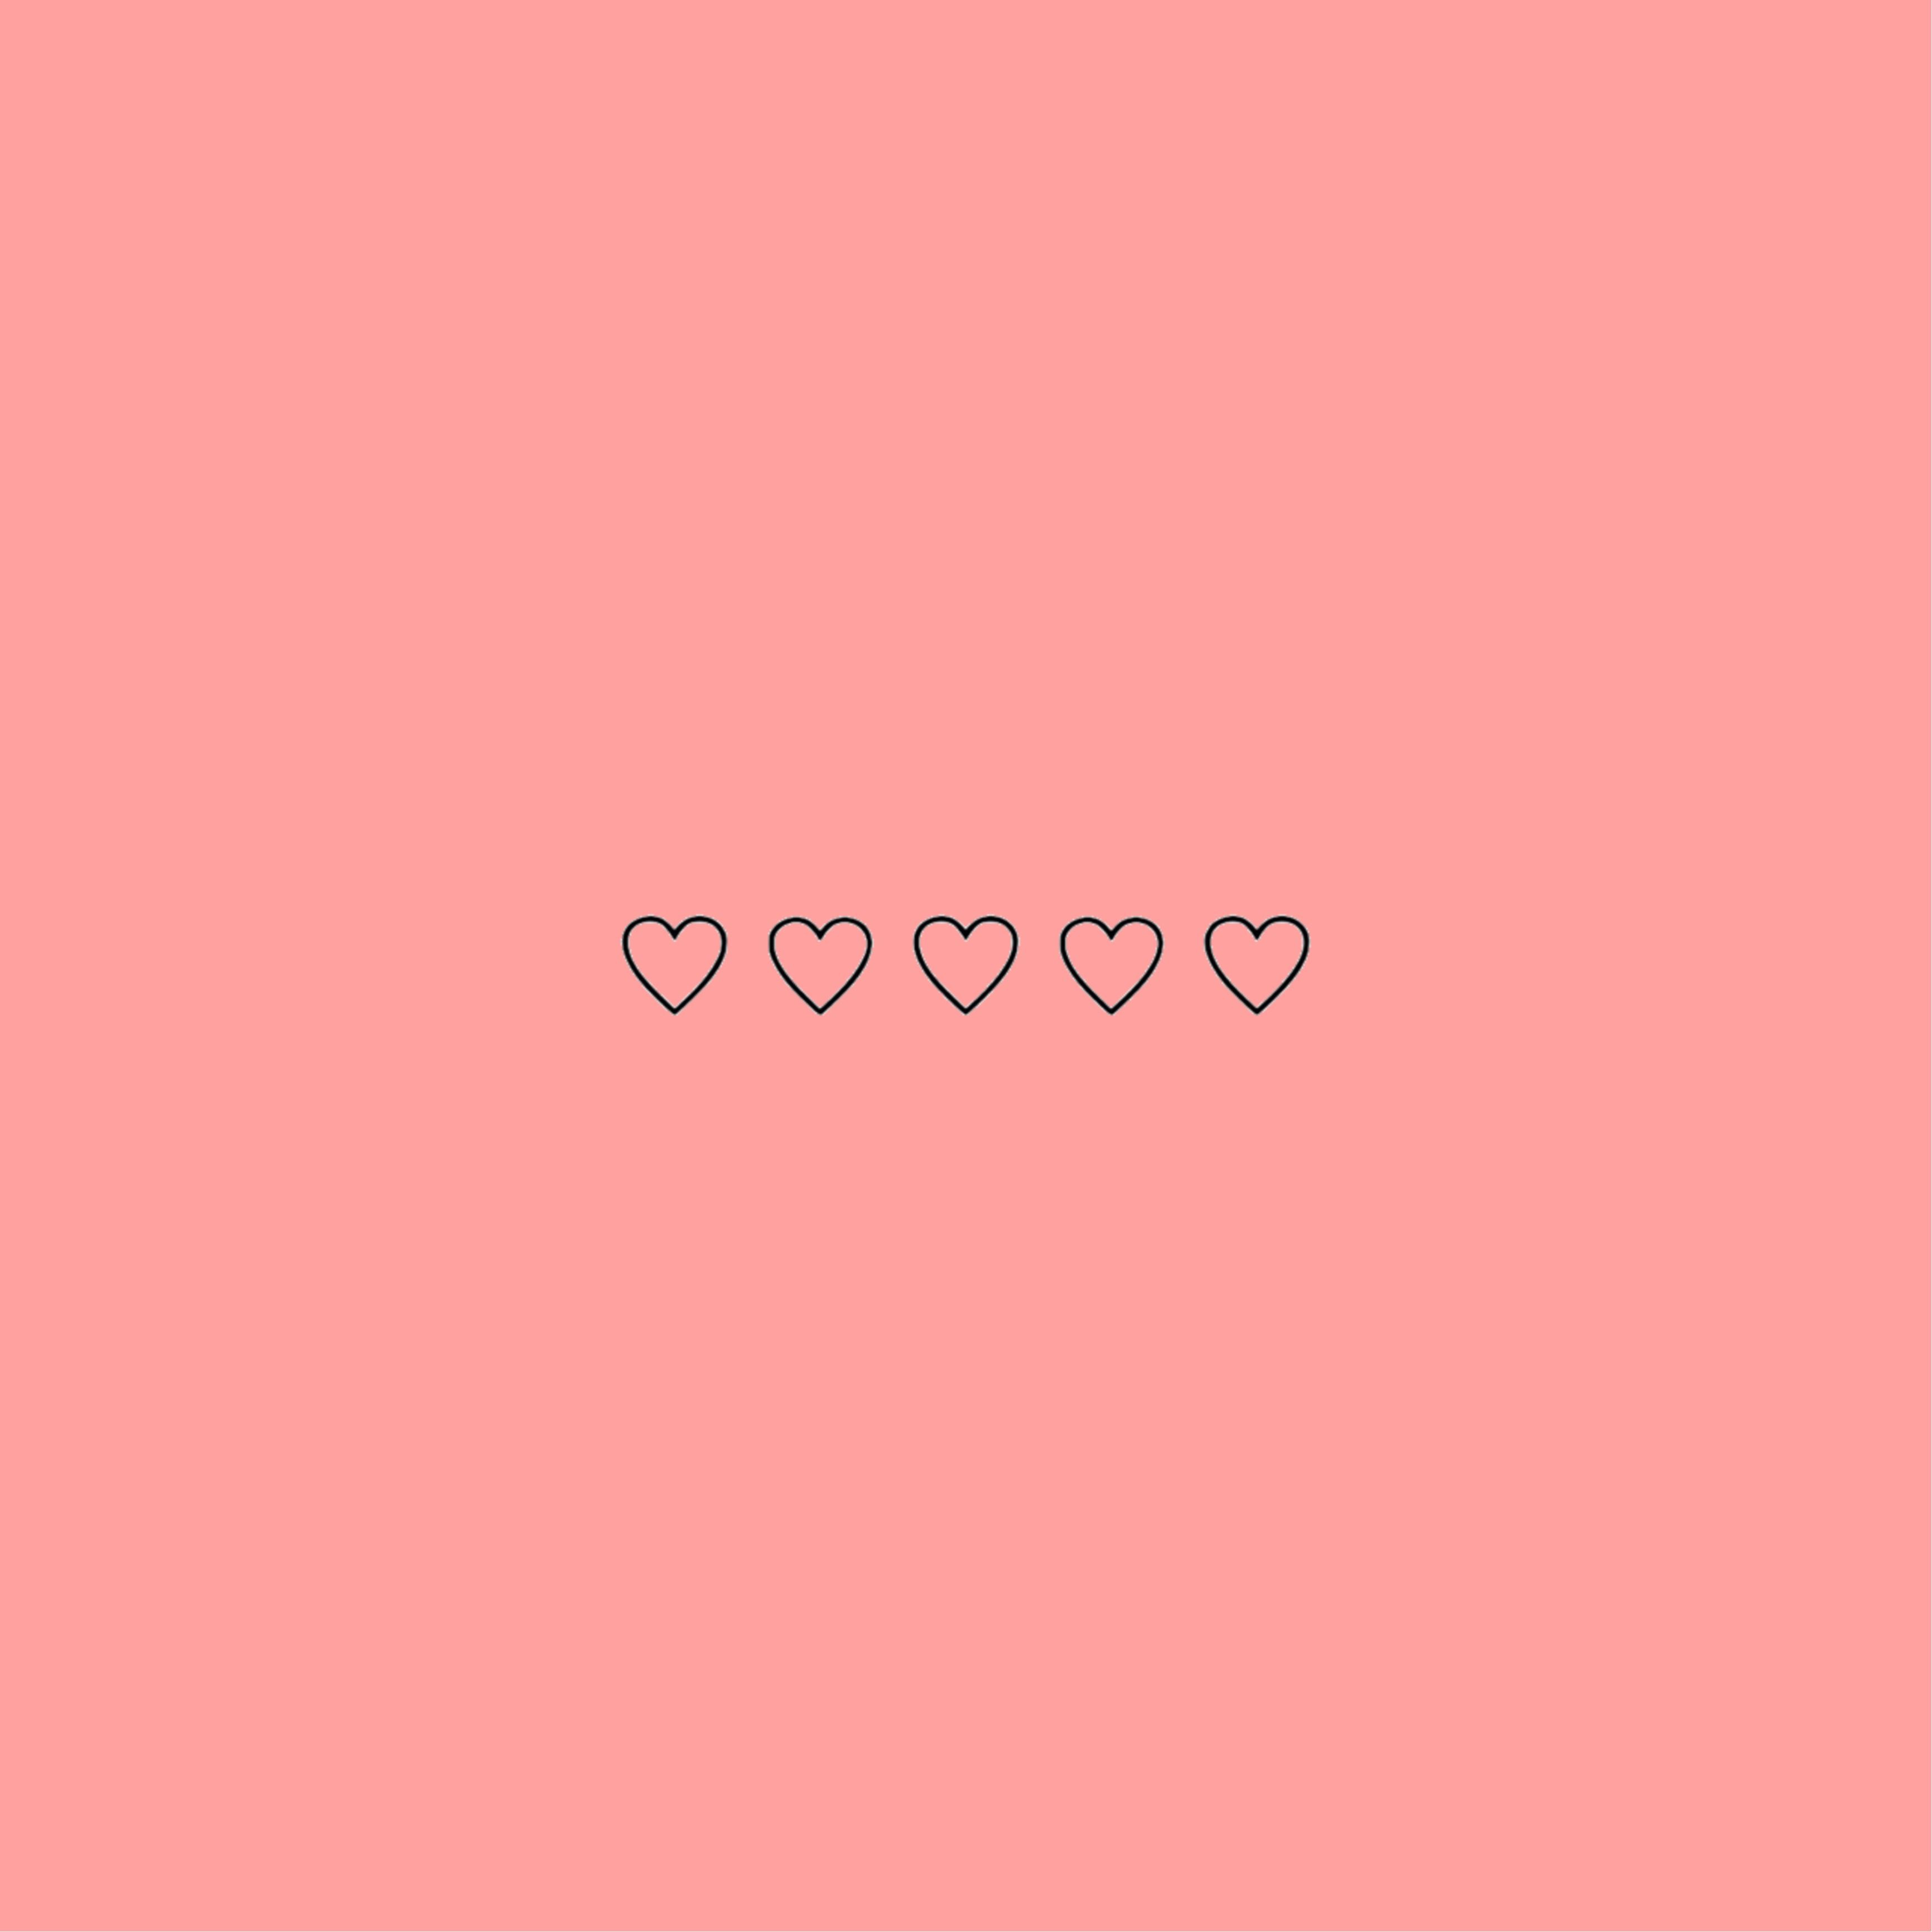 10 of the best minimalist heart icons for your design - Heart